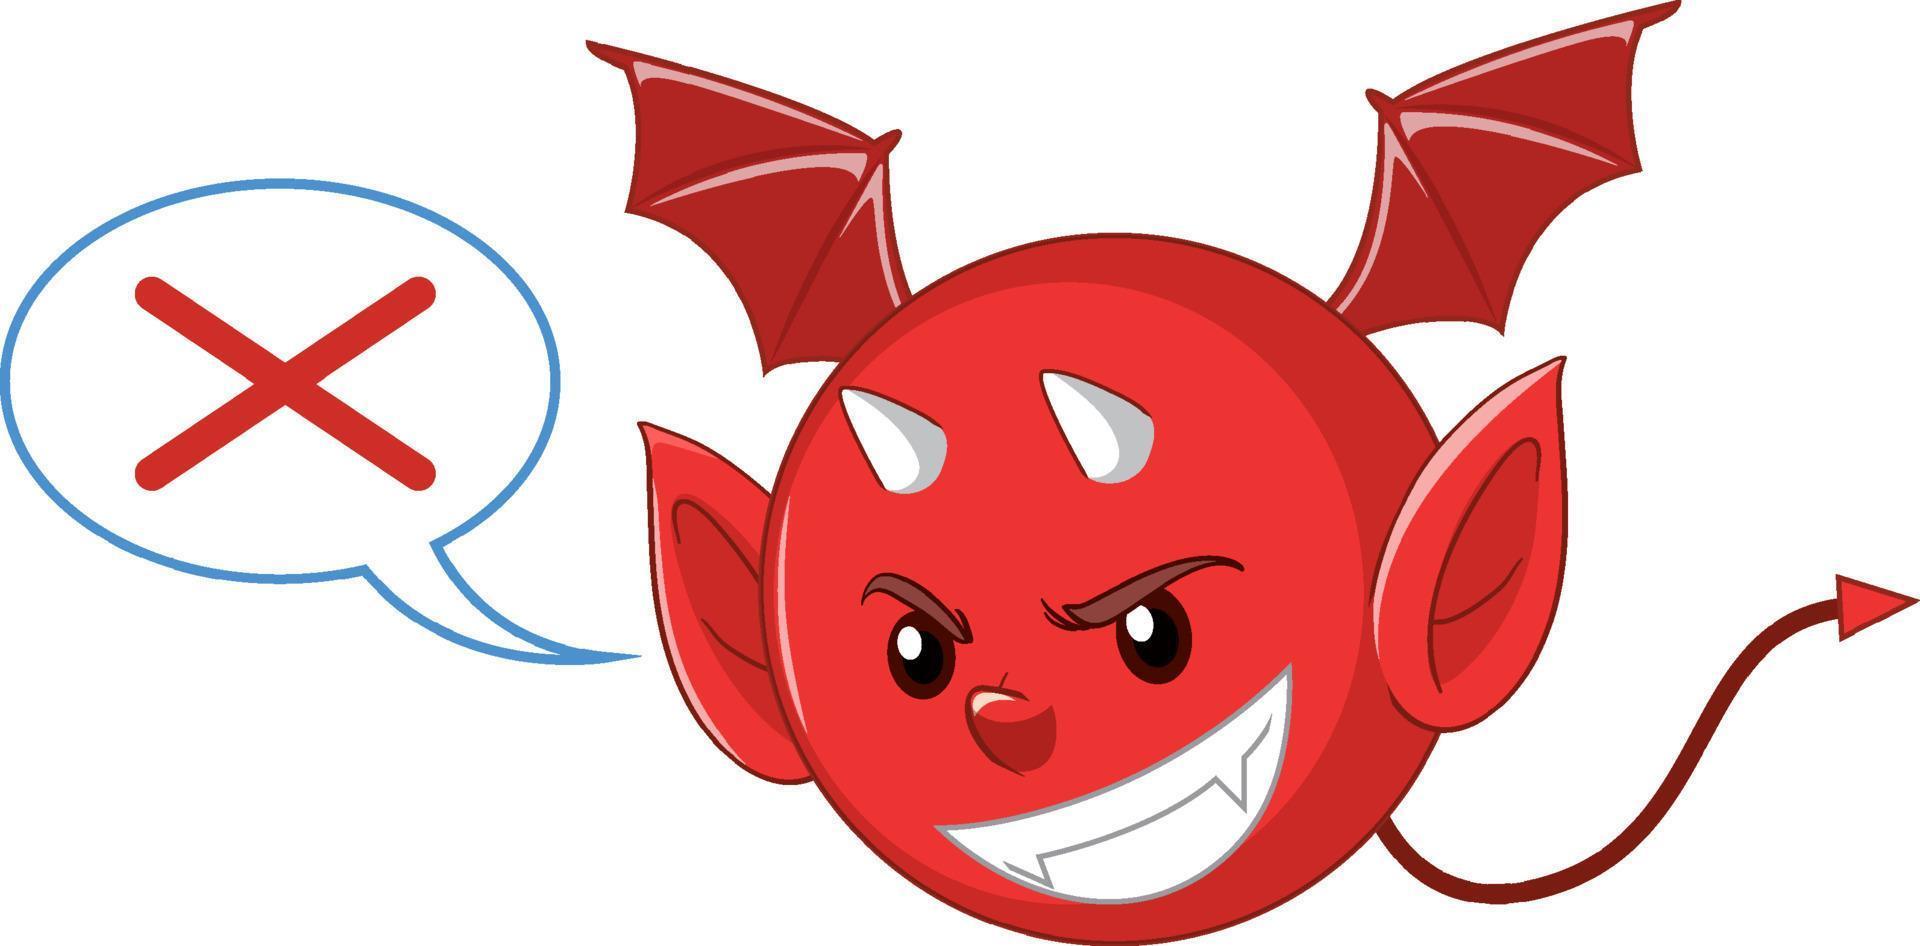 Wicked devil cartoon character on white background vector